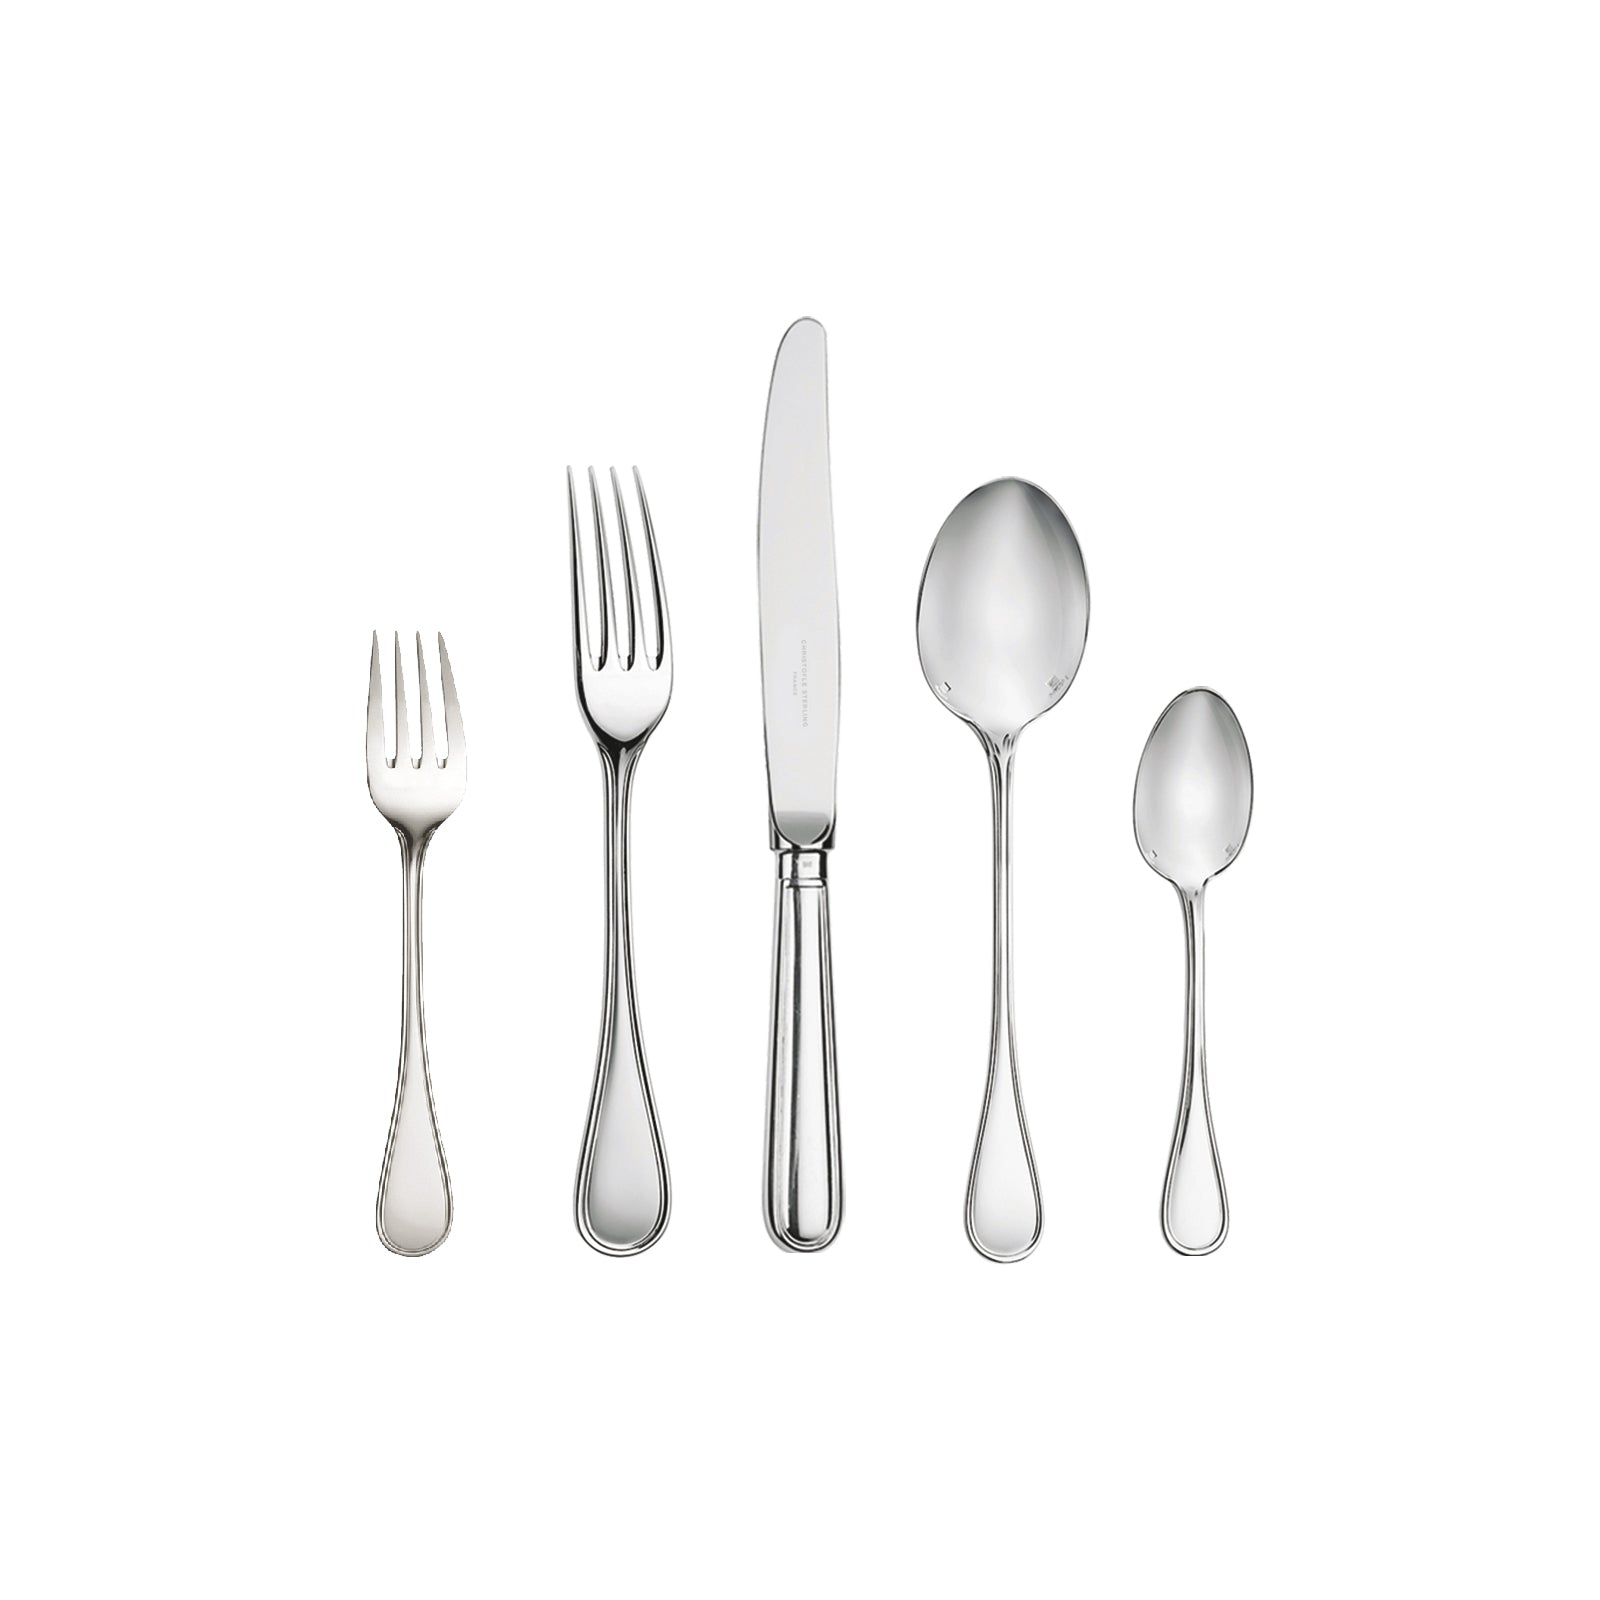 Albi Silver-Plated 5-piece place setting